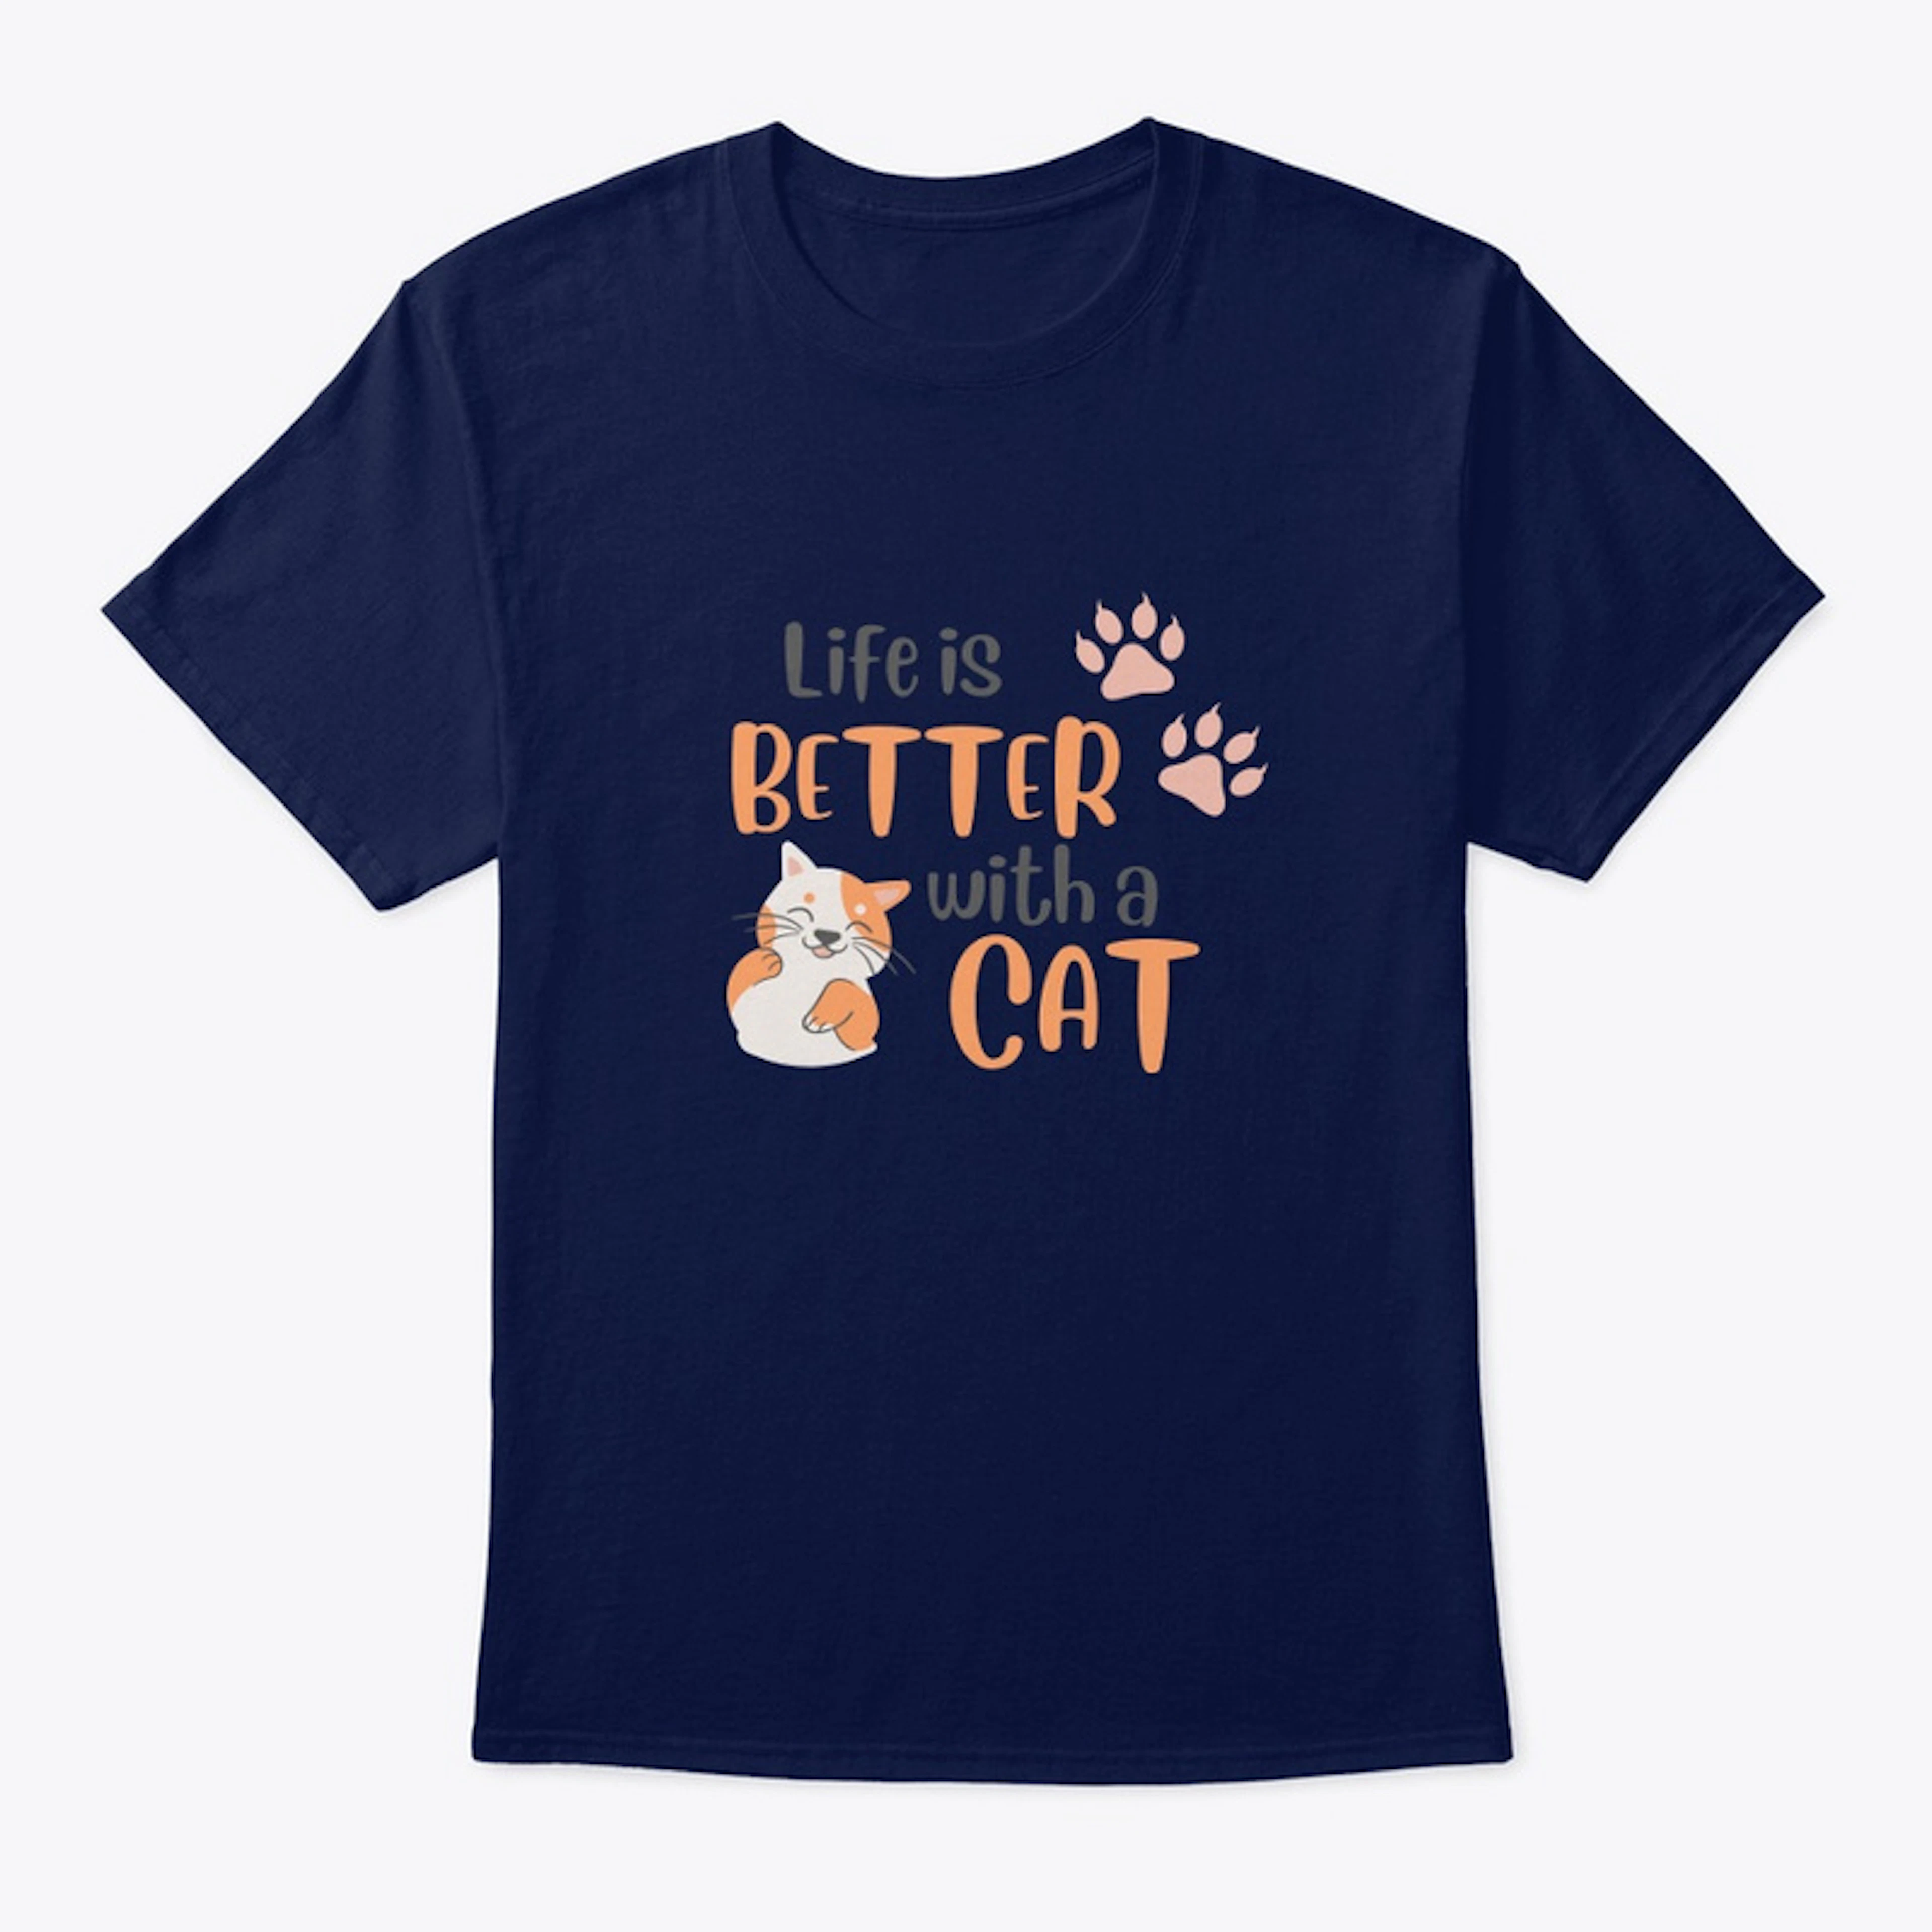 [ENDING SOON]Life is Better with a Cat